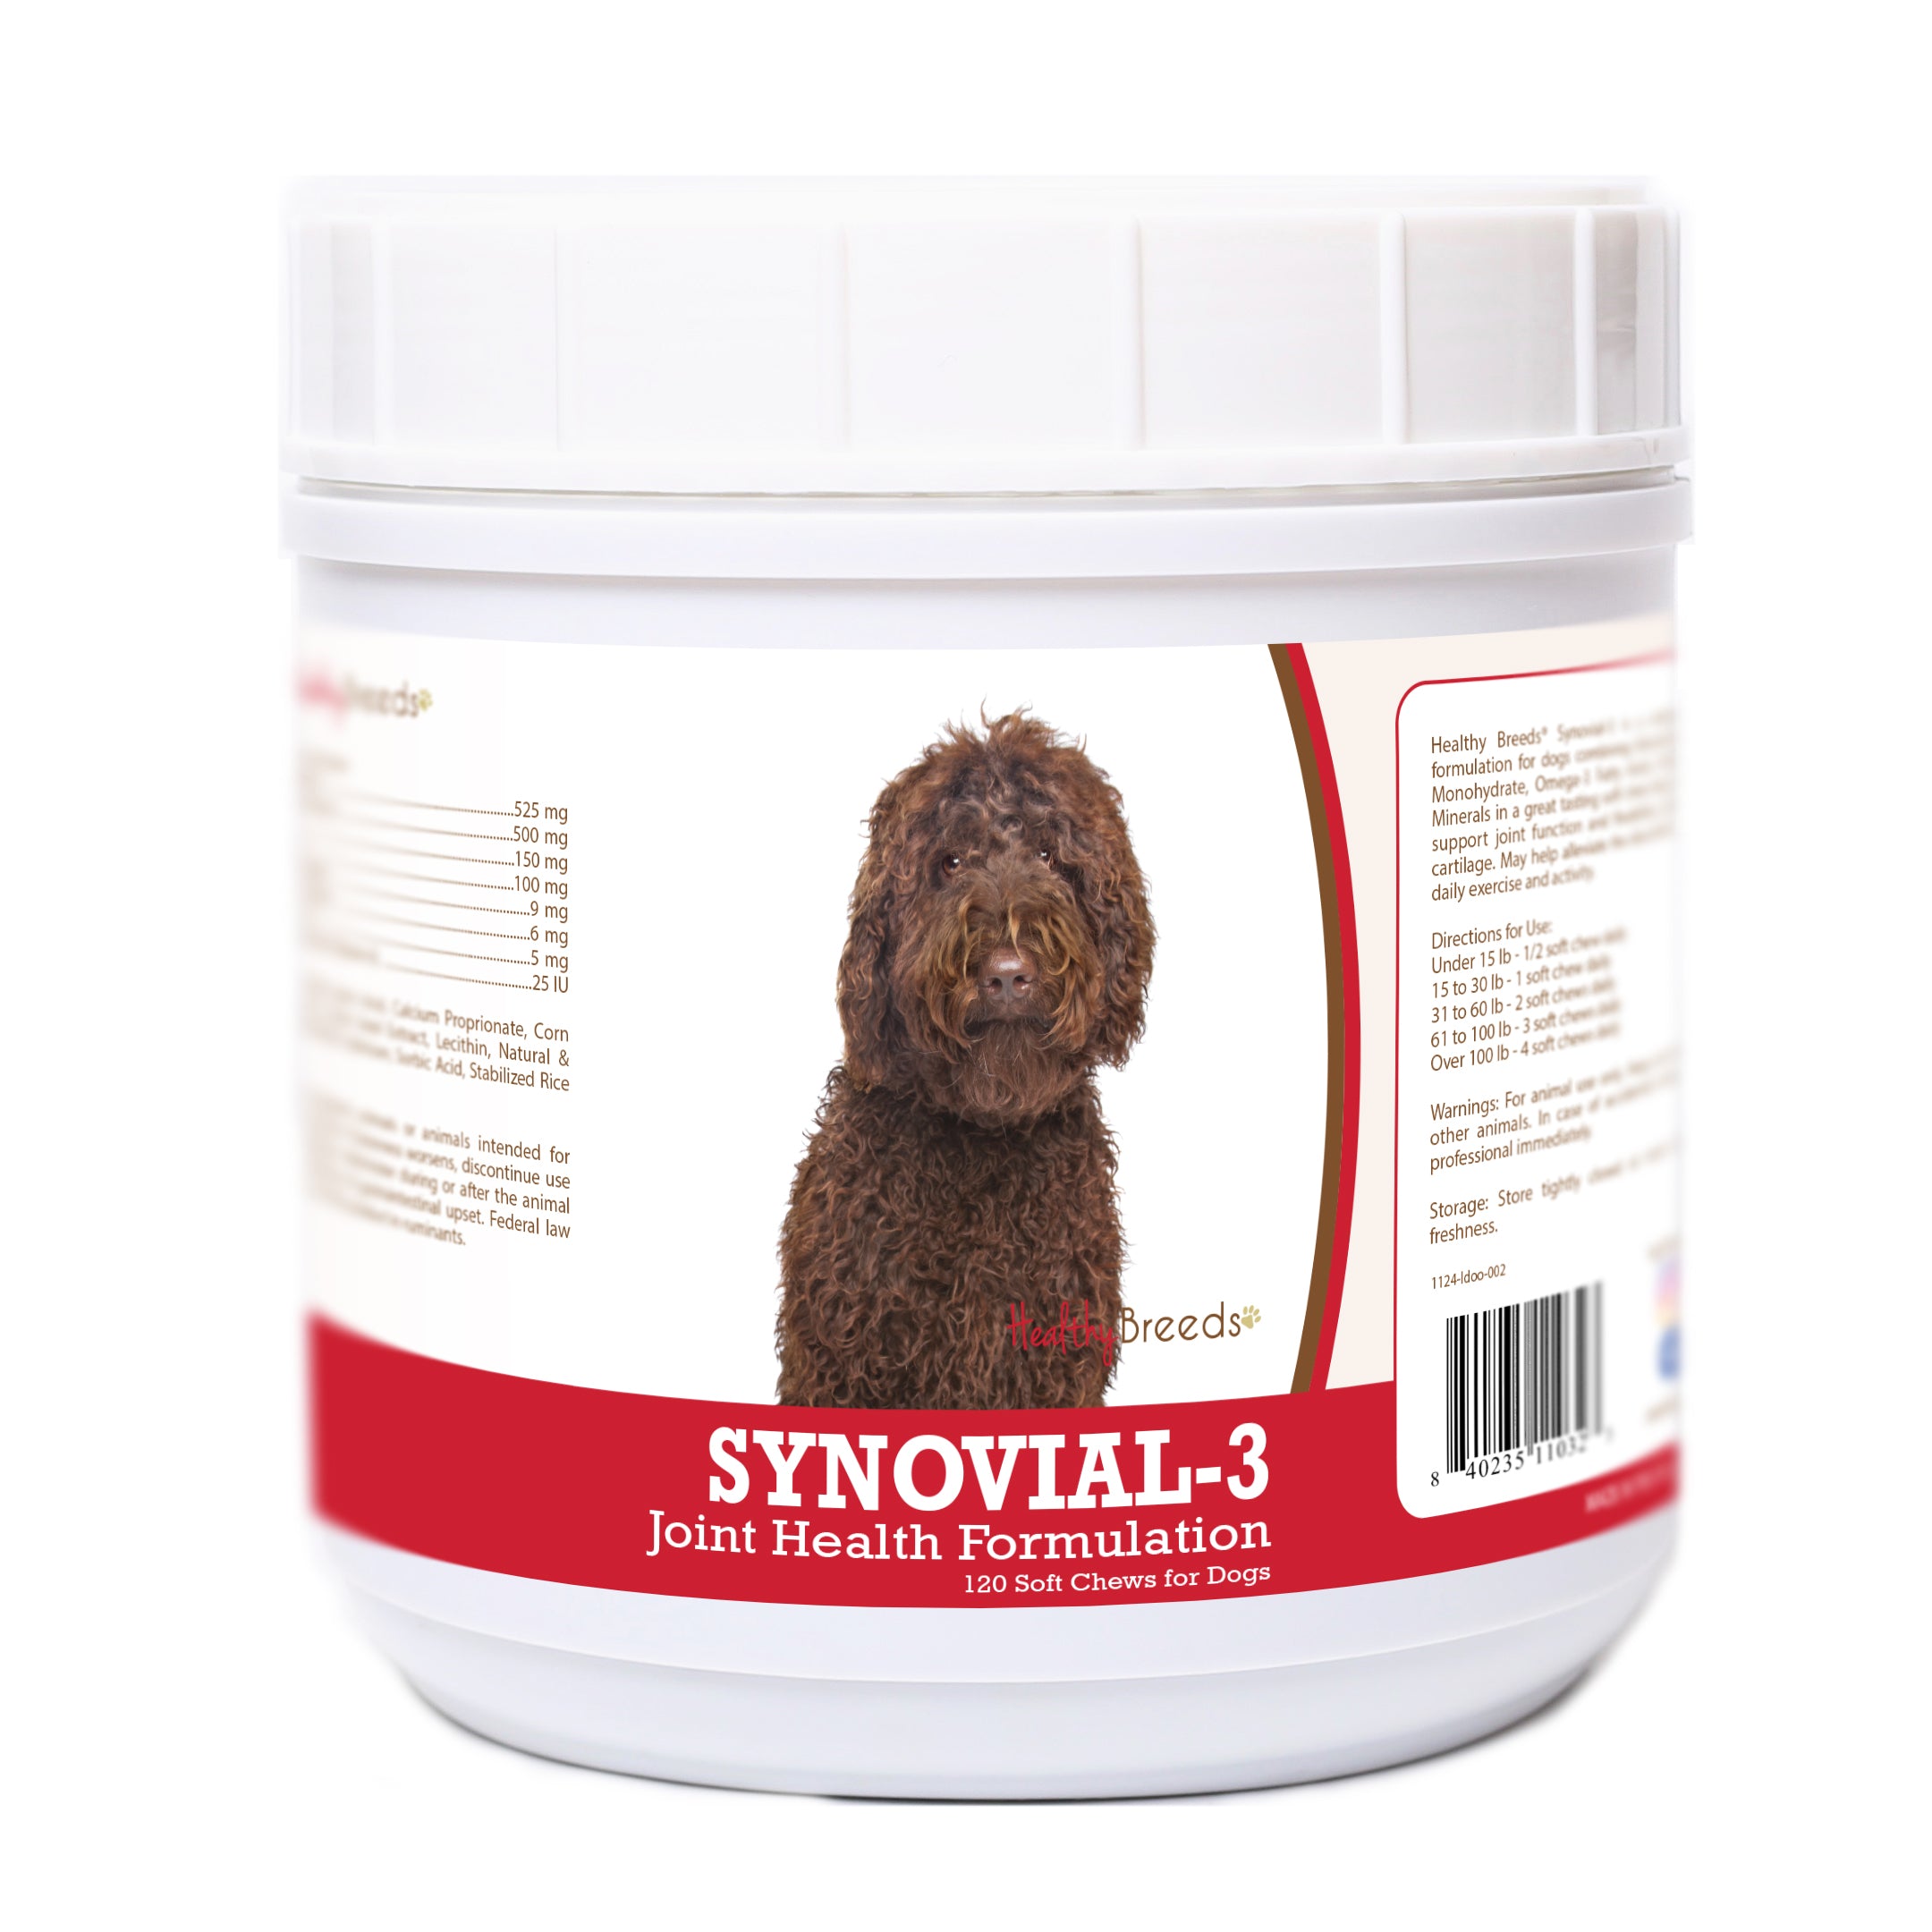 Labradoodle Synovial-3 Joint Health Formulation Soft Chews 120 Count